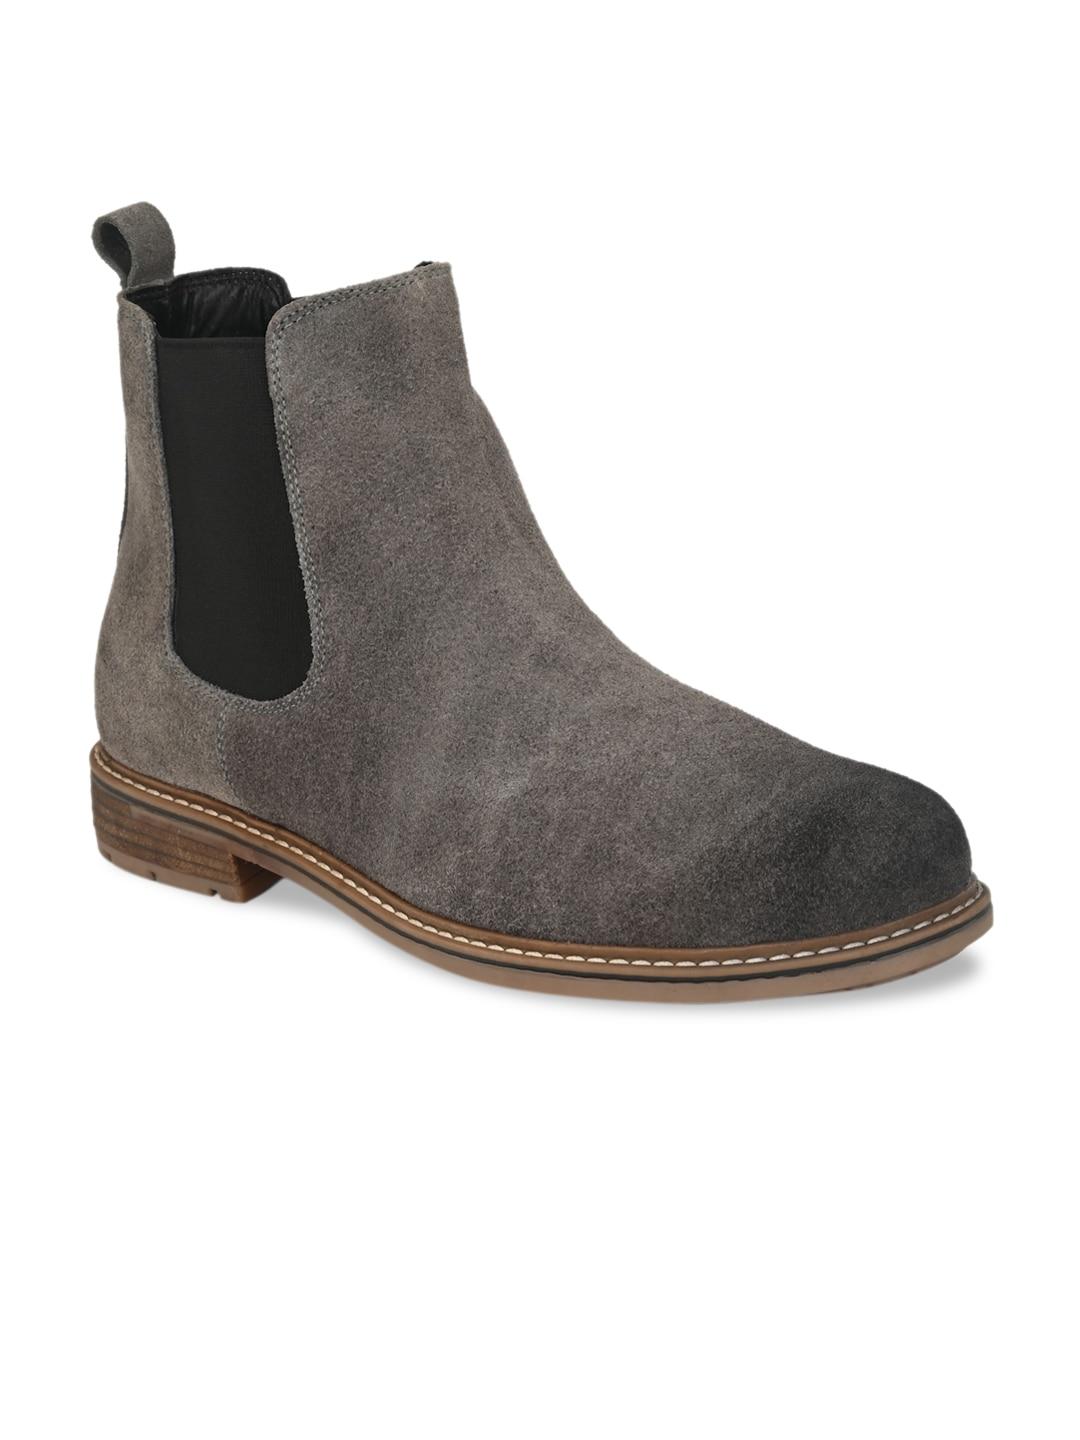 shences-men-grey-solid-suede-leather-high-top-chelsea-boots